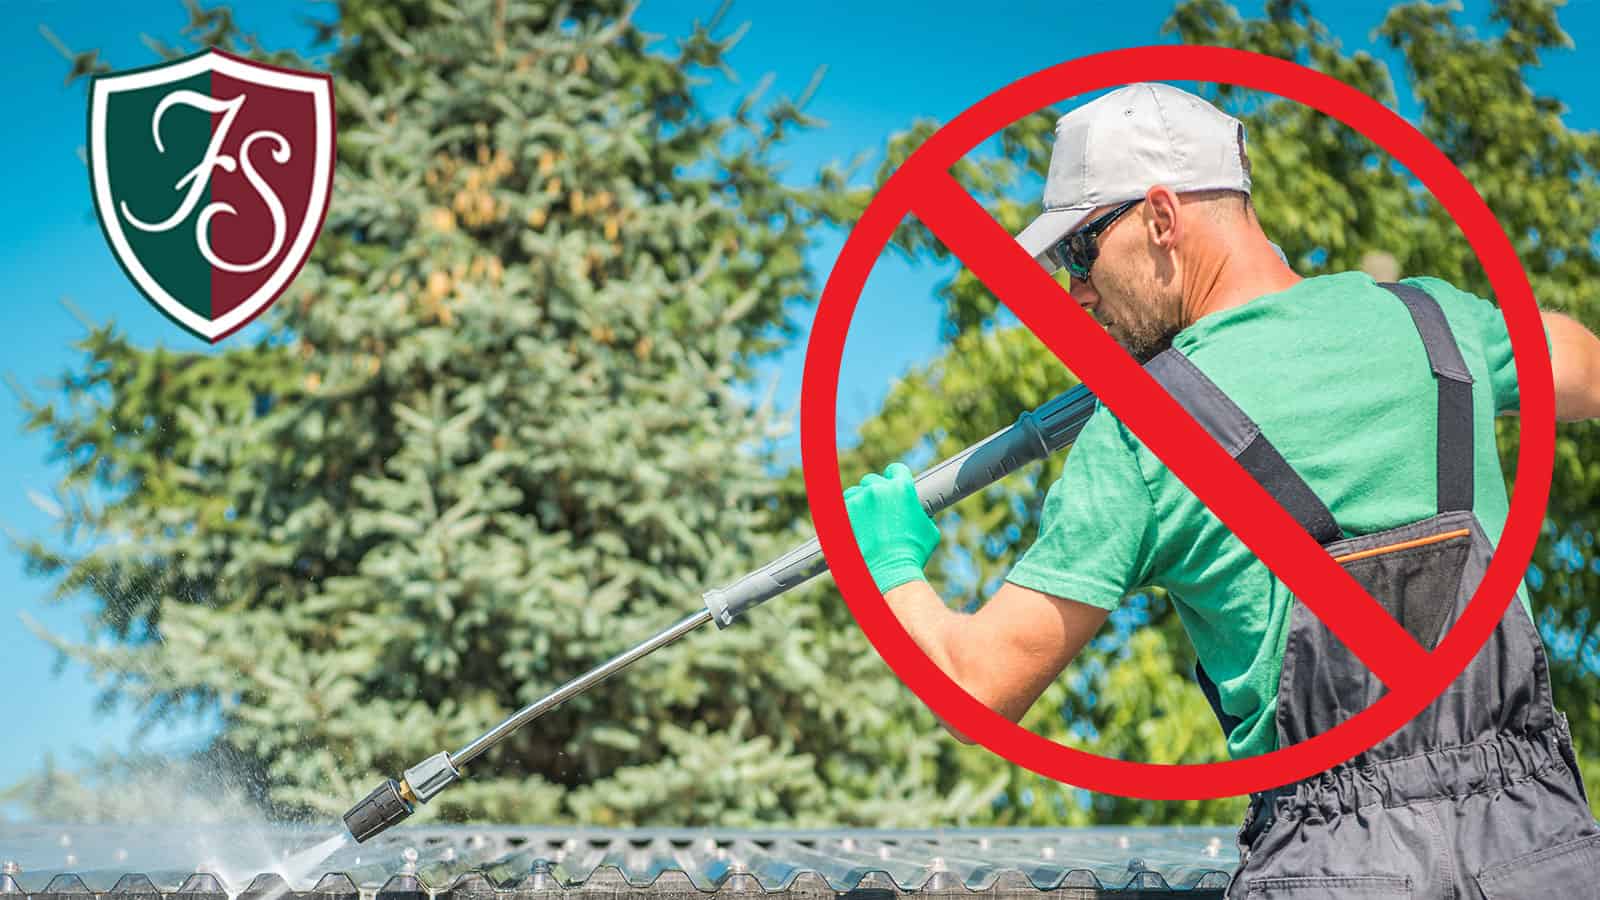 Don’t get out the power washer for your roof. Here are some tips for safe, effective roof cleaning.